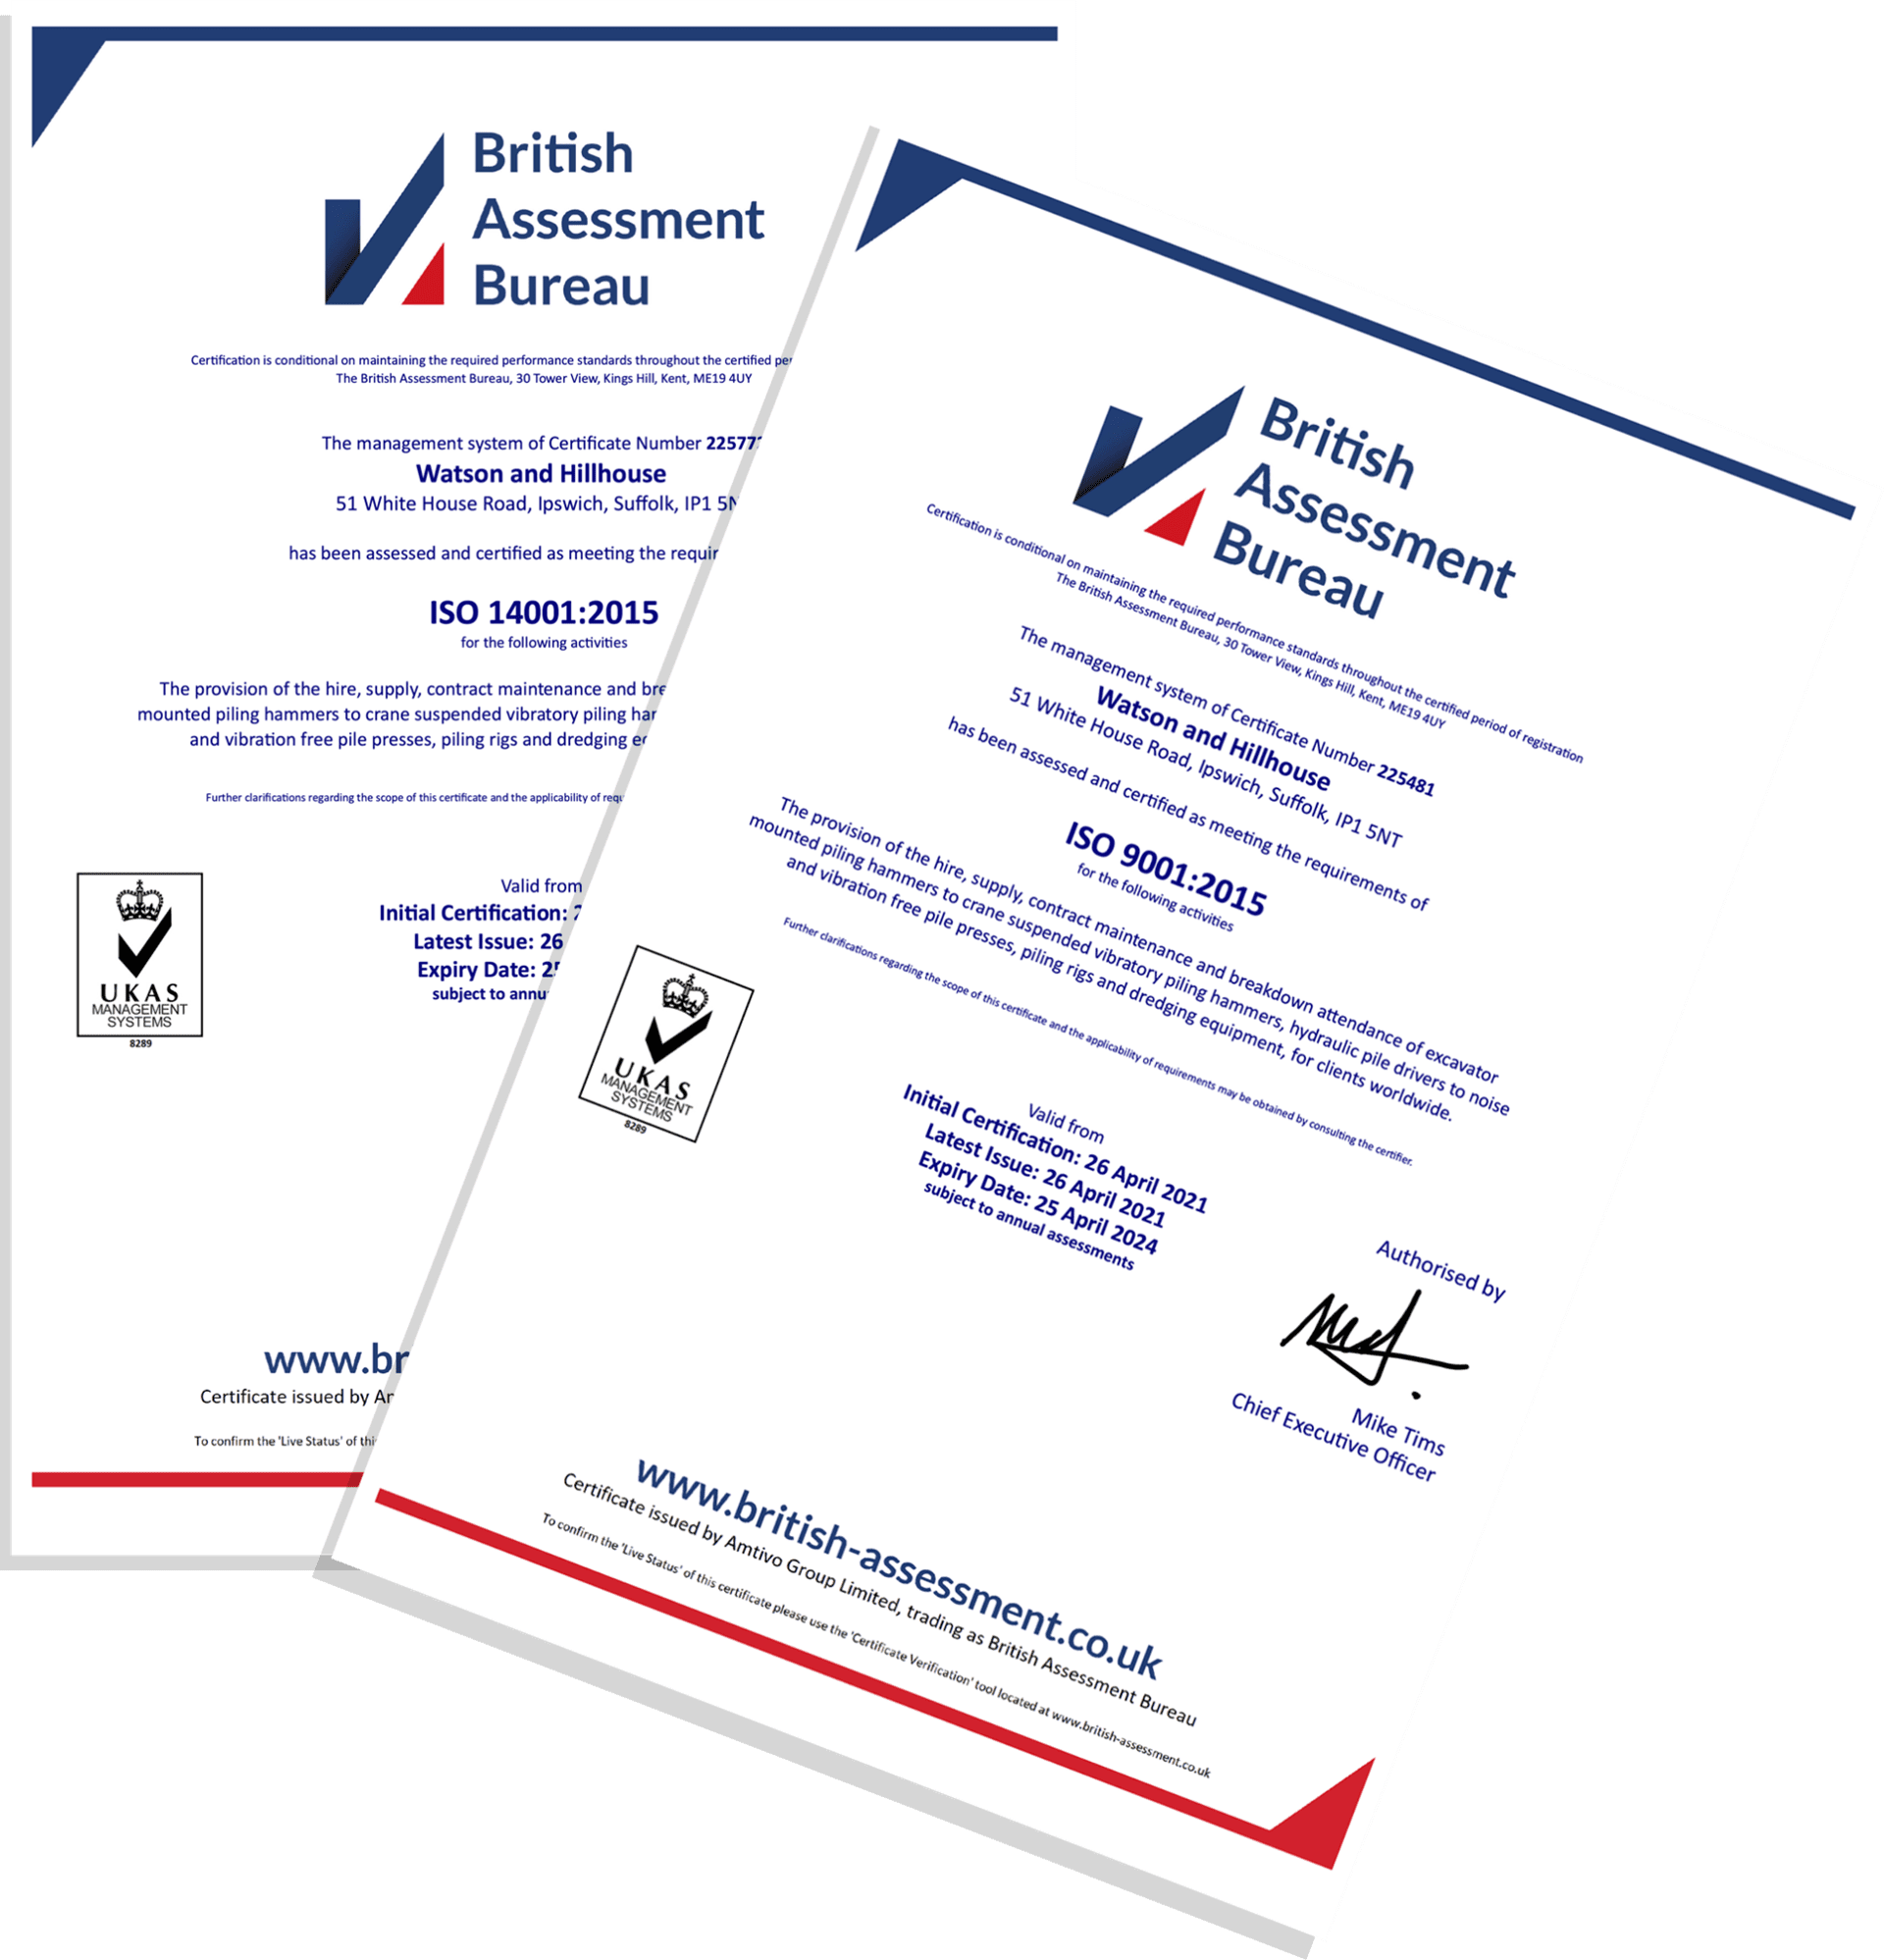 ISO 9001 and 14001 certificates